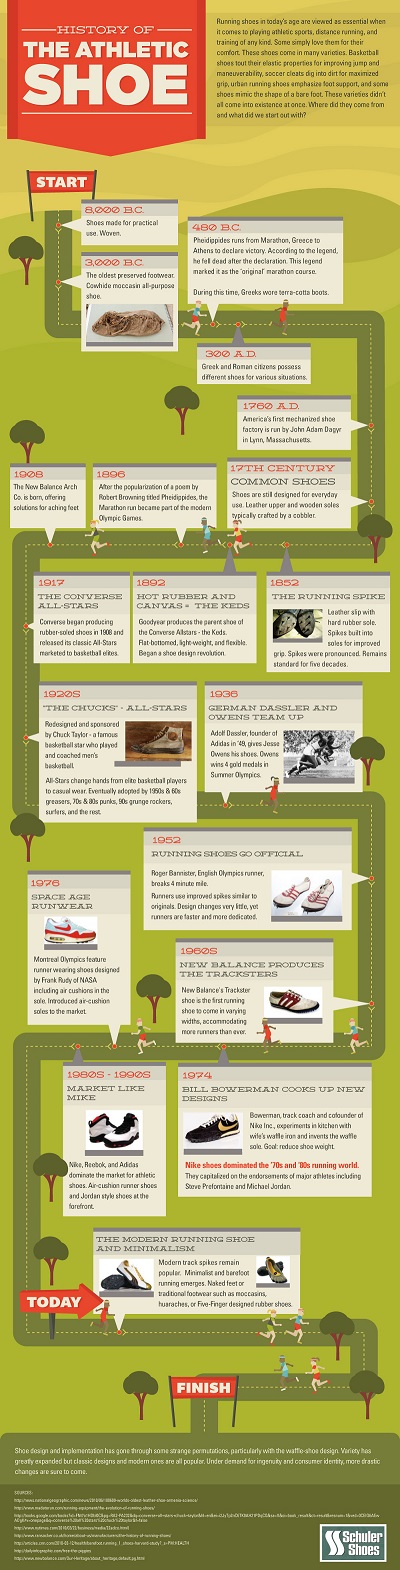 History of Athletic Shoes